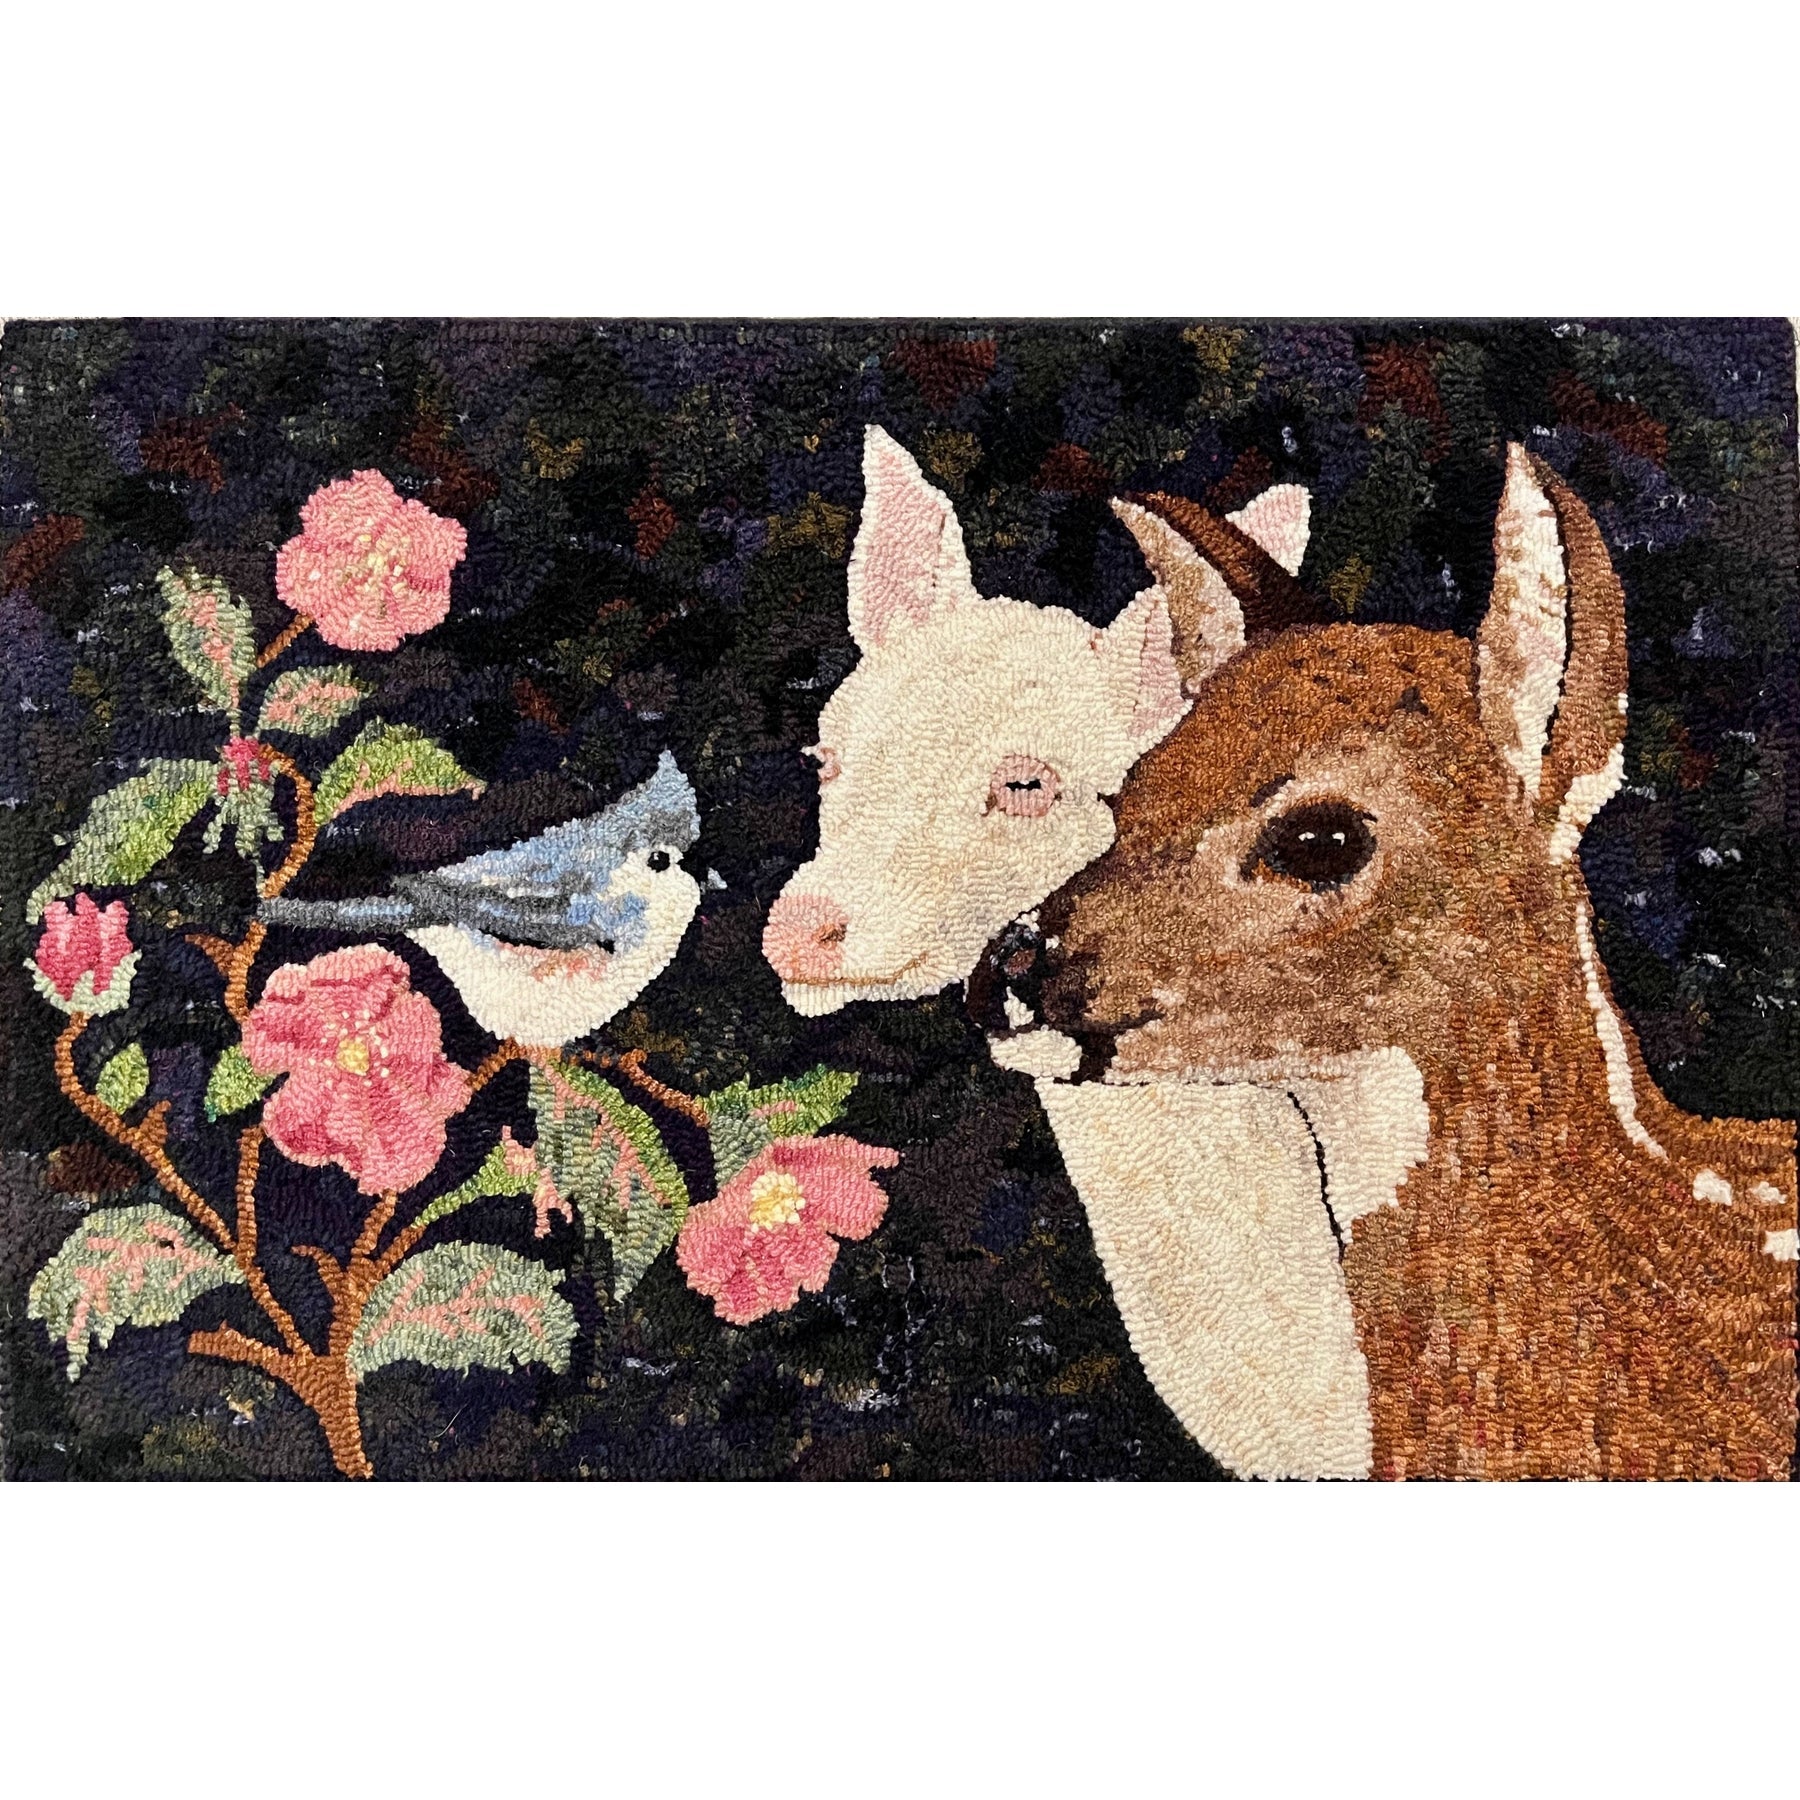 Twin Fawns, rug hooked by Linda Gillen